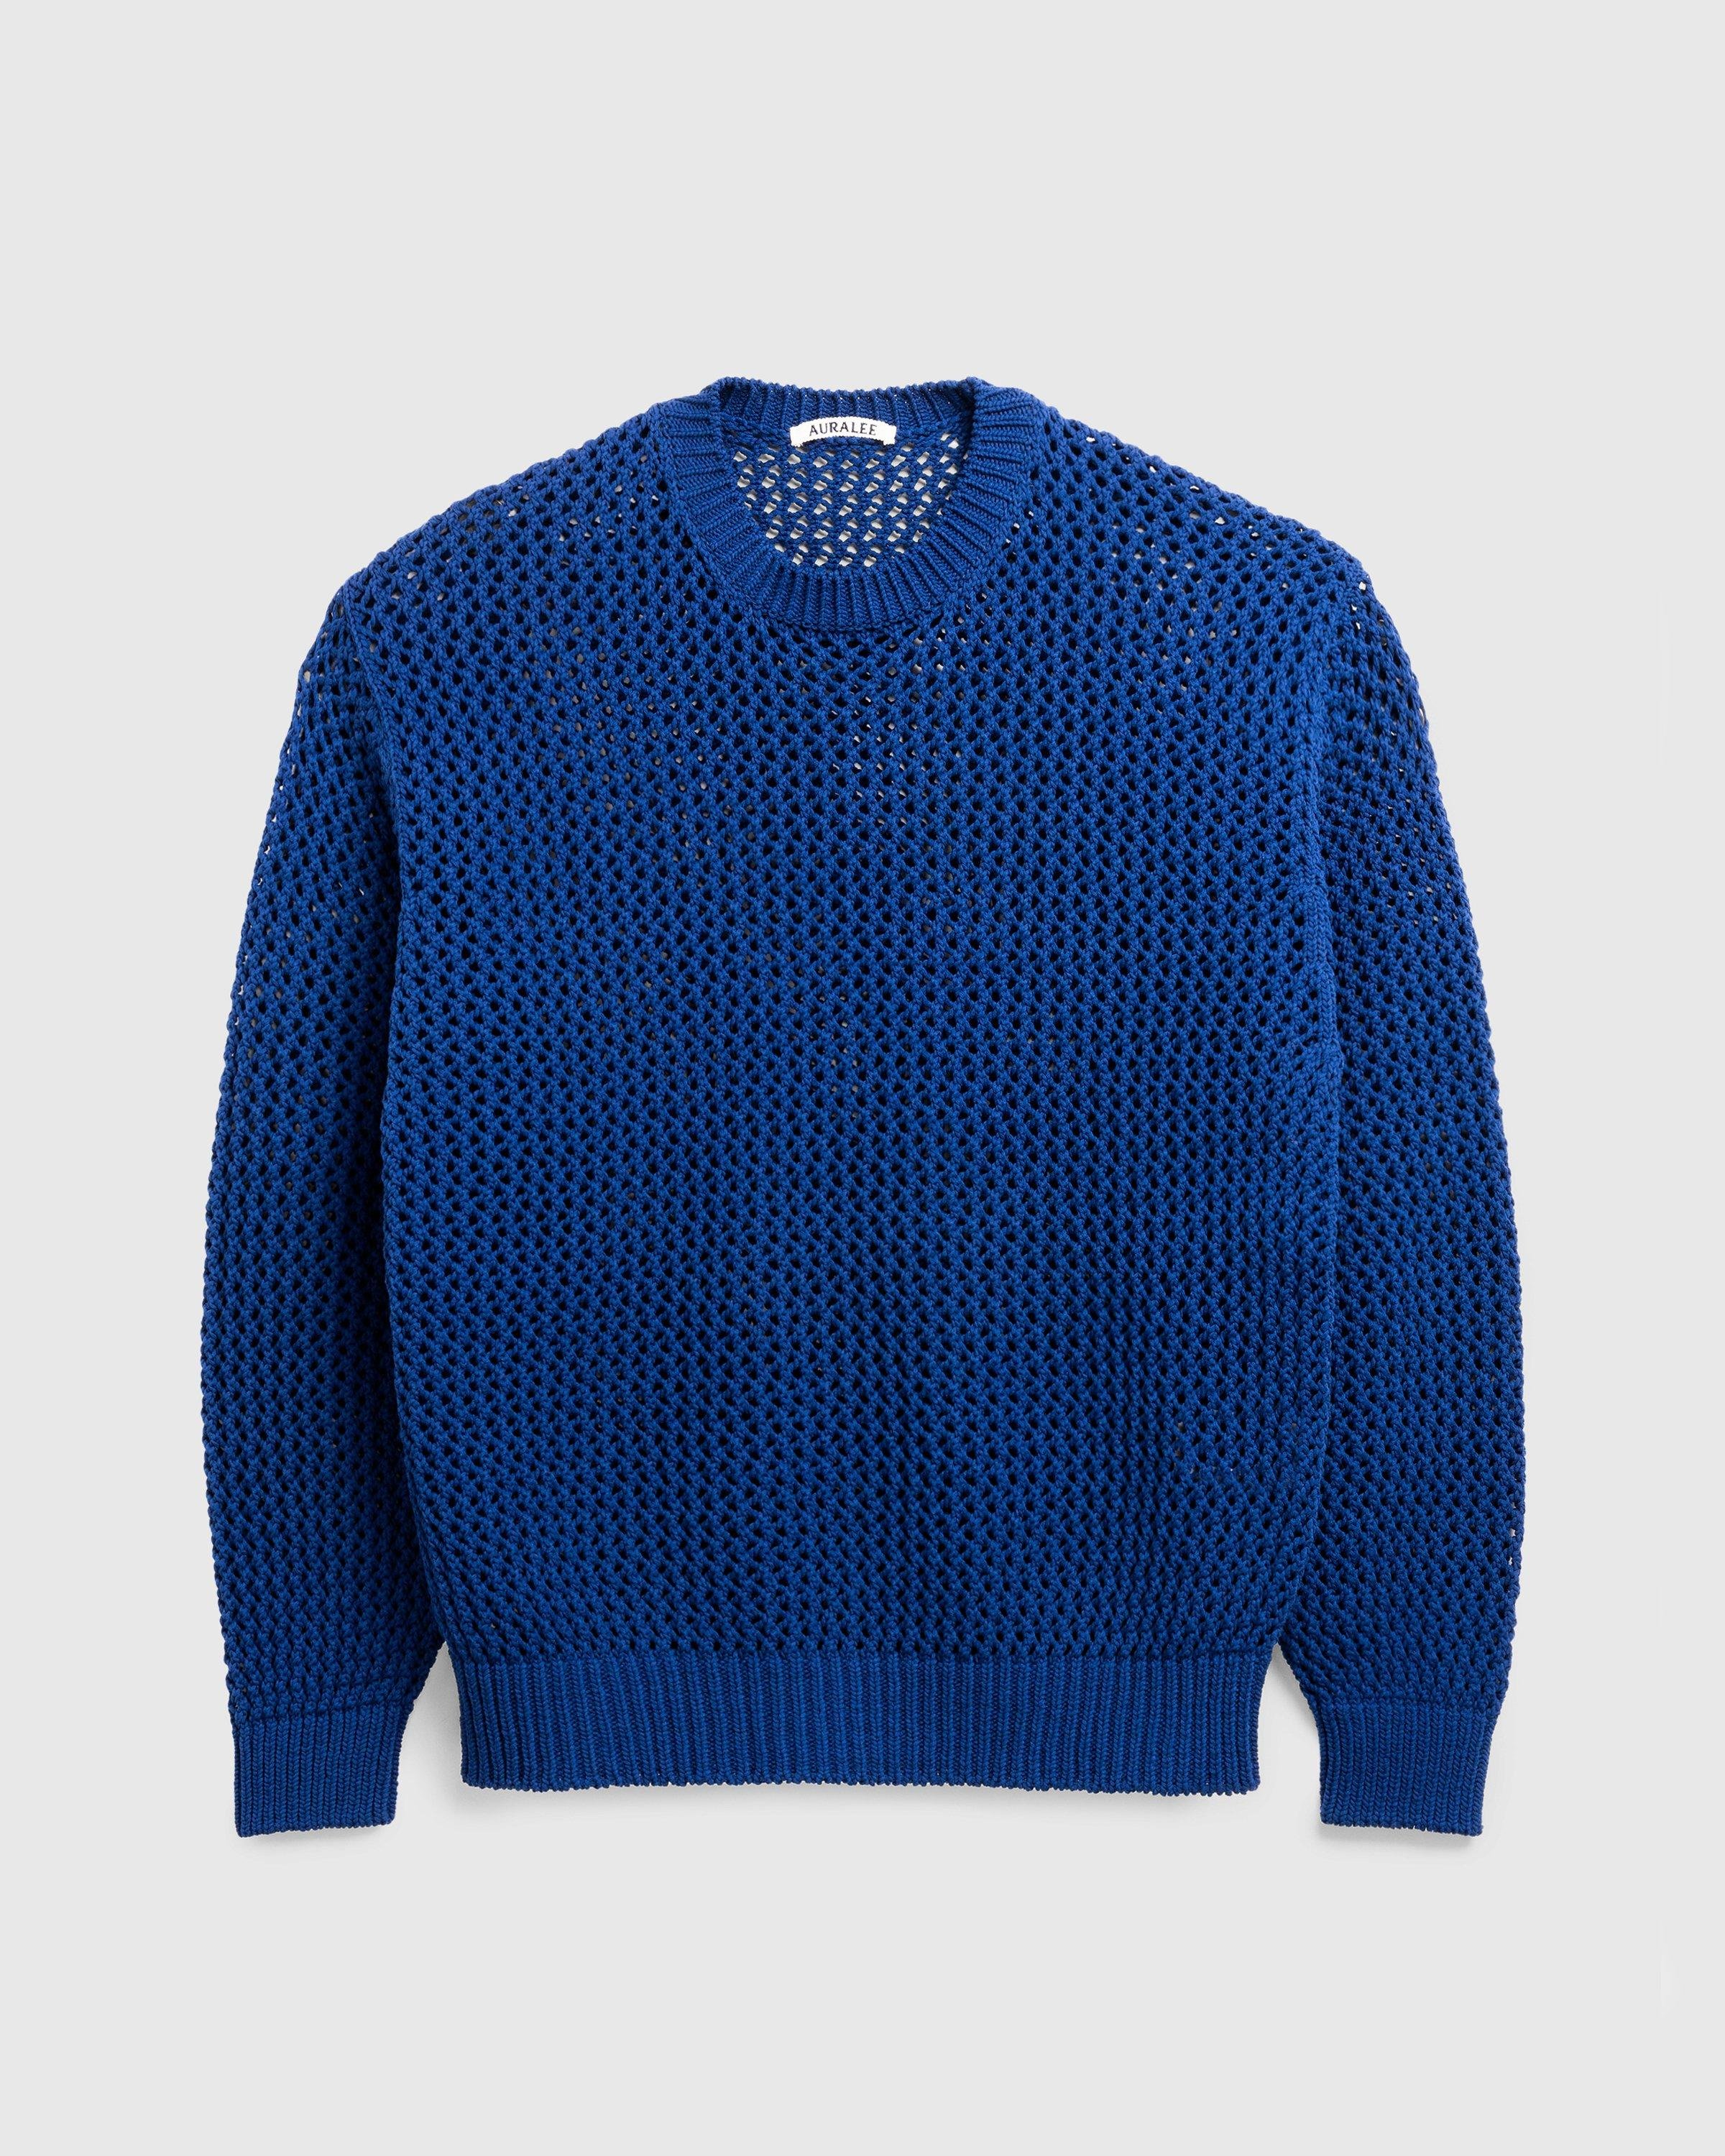 AuraleeCotton Lily-Yarn Mesh Knit Pullover Blue by HIGHSNOBIETY